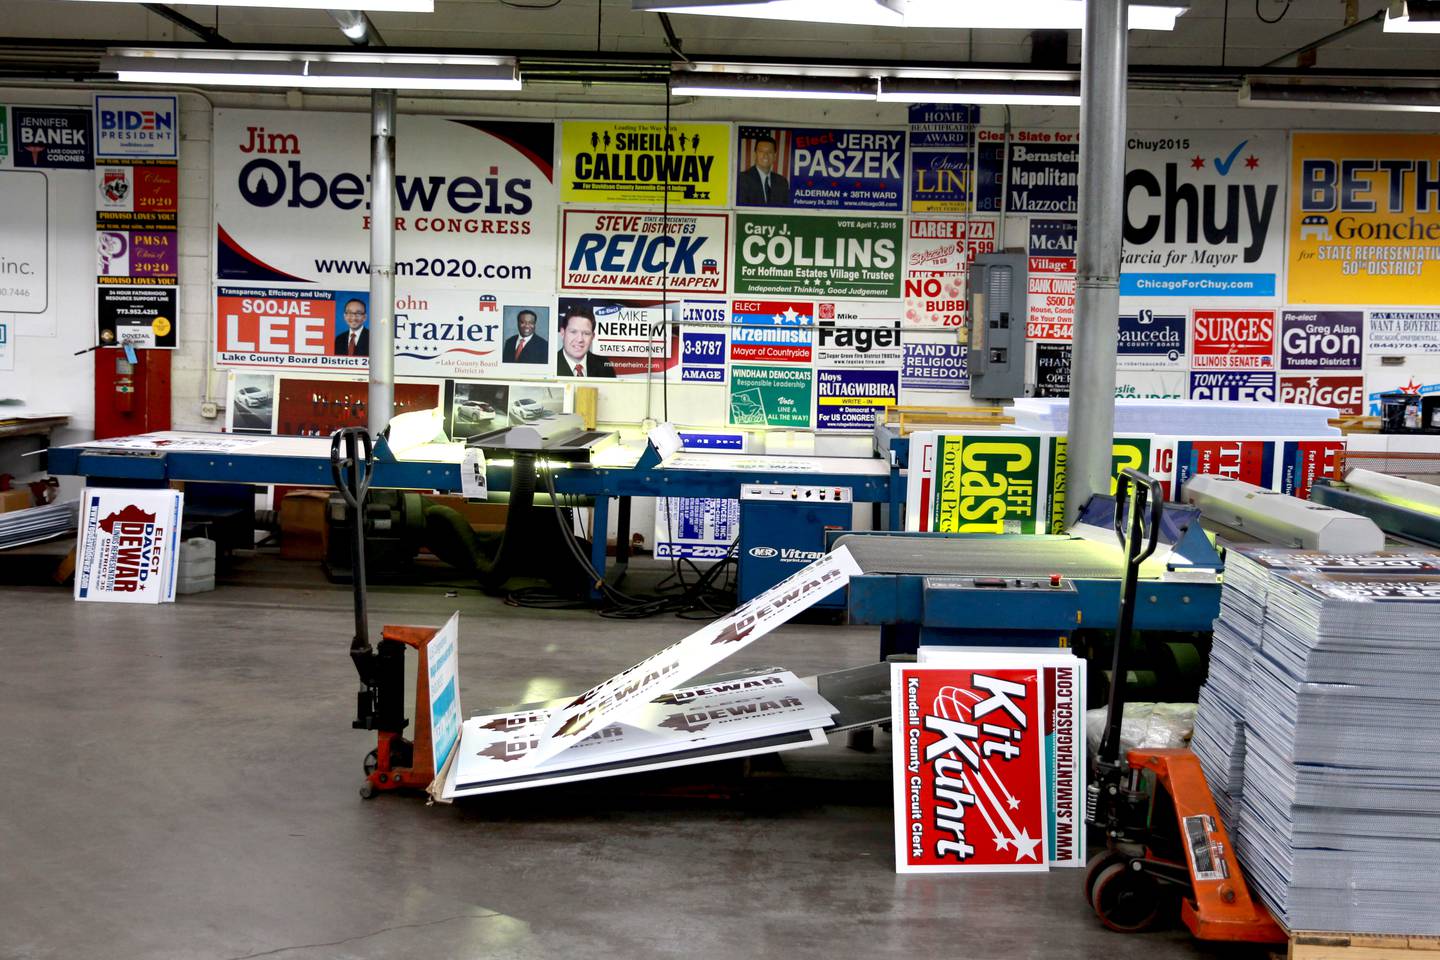 Awesome Campaigns Inc. in Elgin prints many of the campaign signs for candidates throughout Kane County and Illinois.